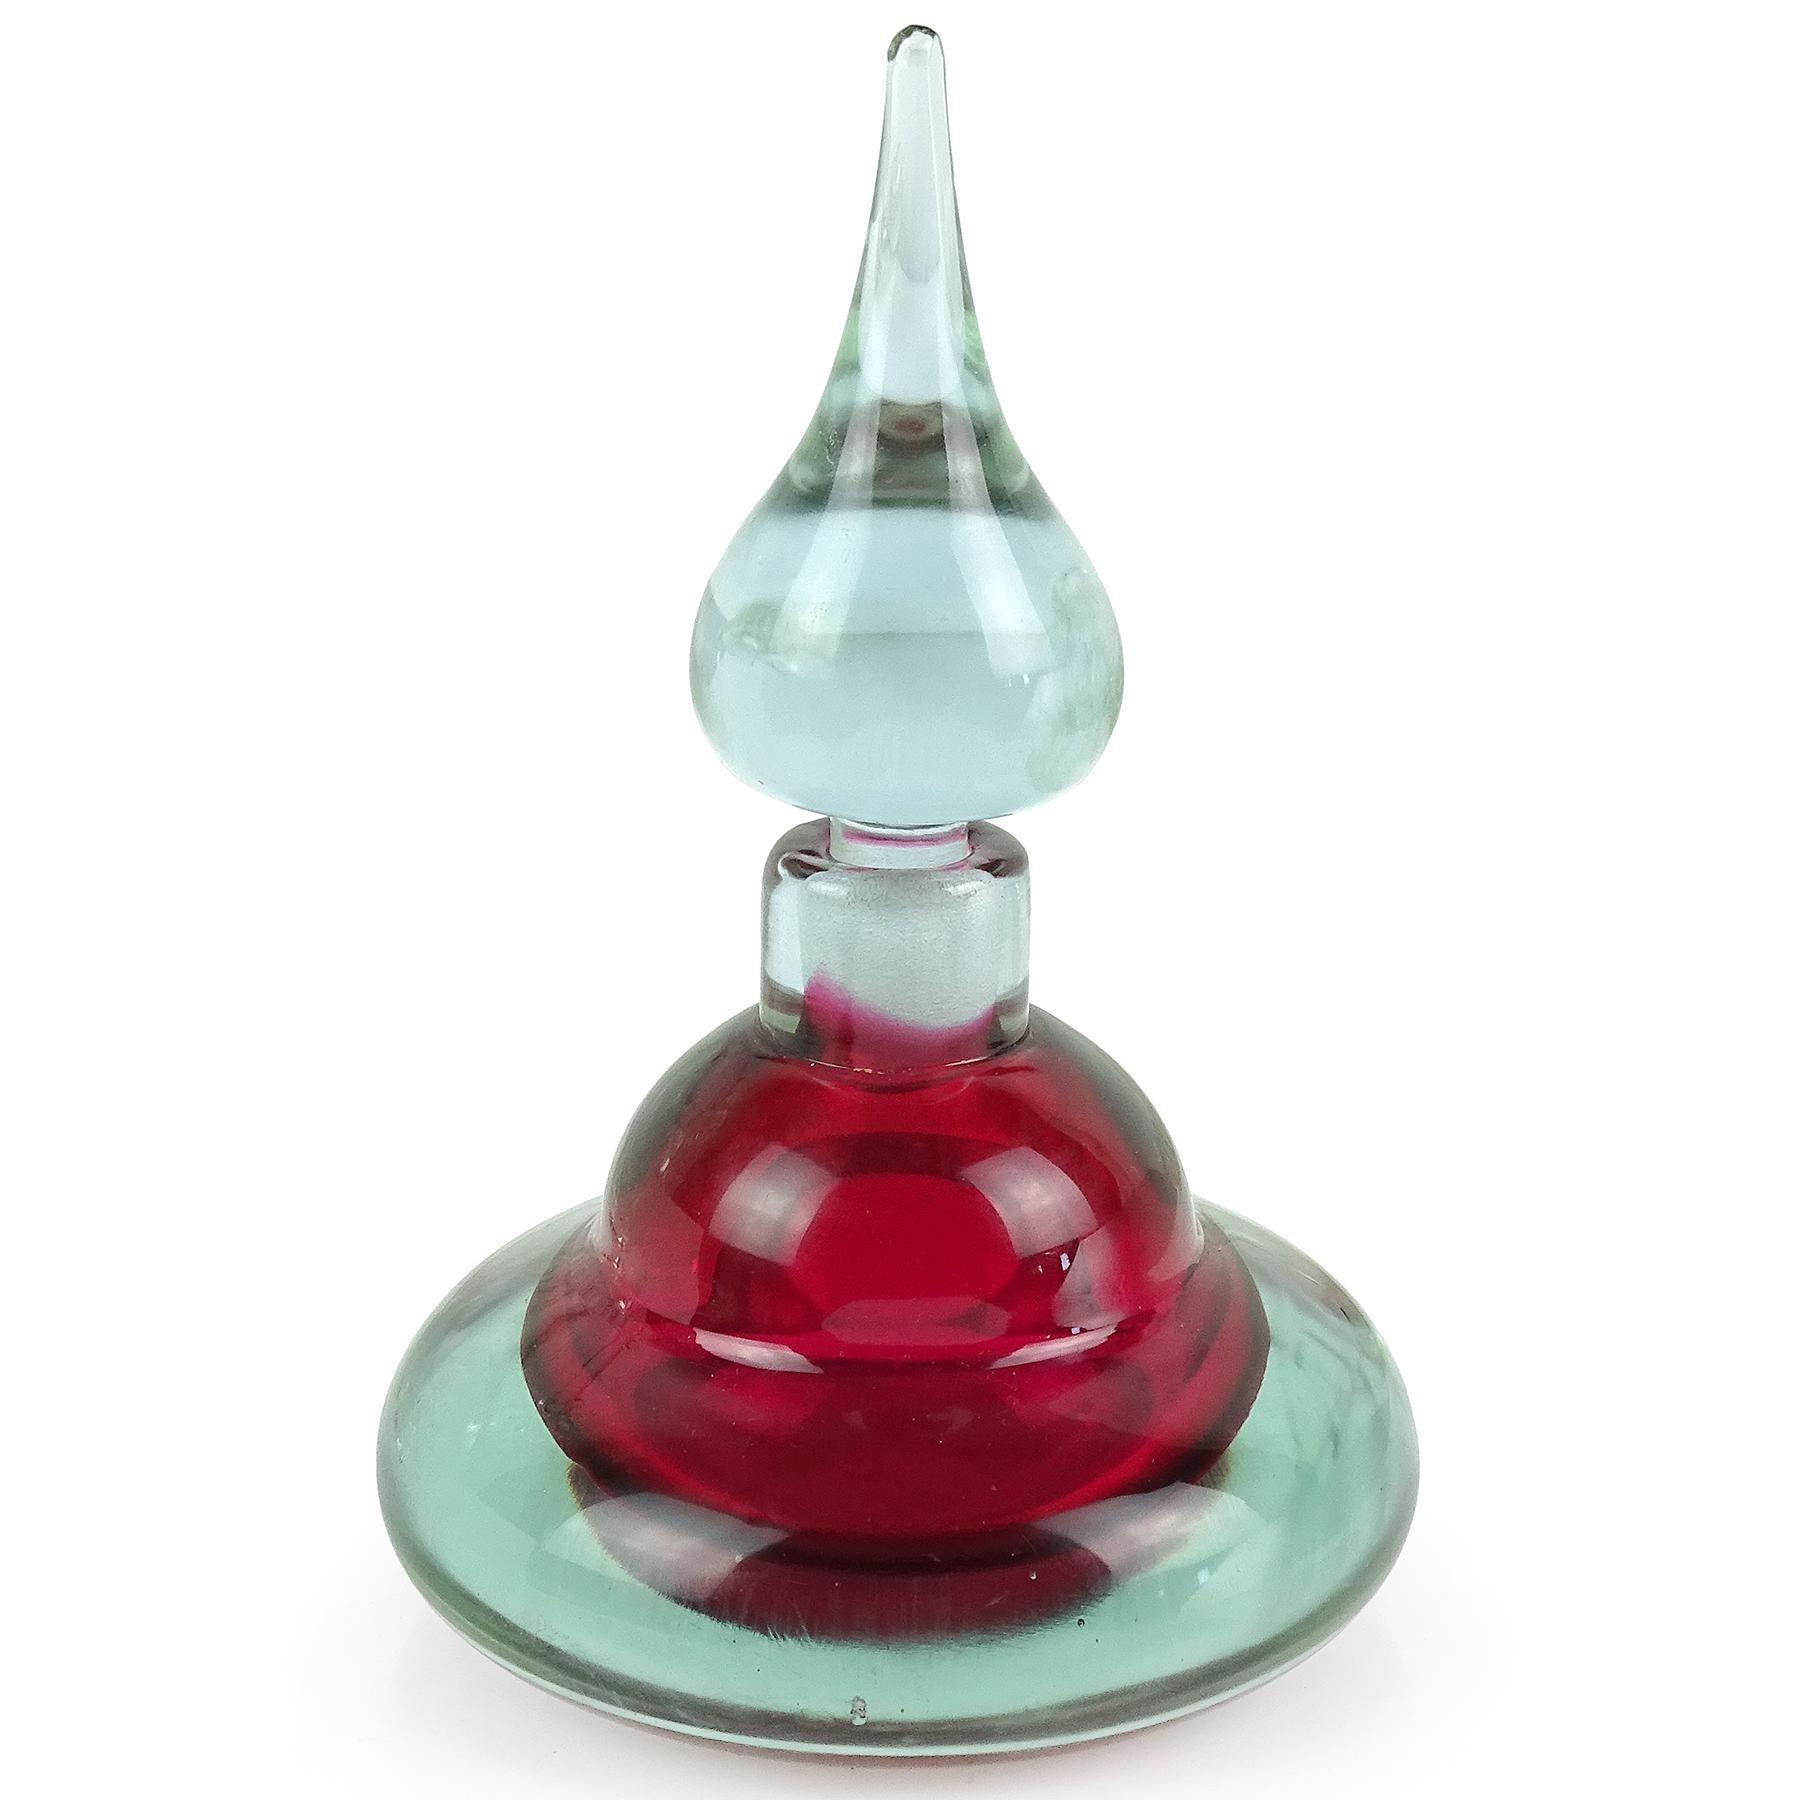 Beautiful vintage Murano hand blown Sommerso purple and red Italian art glass vanity perfume bottle. Documented to the Seguso Vetri d'Arte Company. The piece has an original 